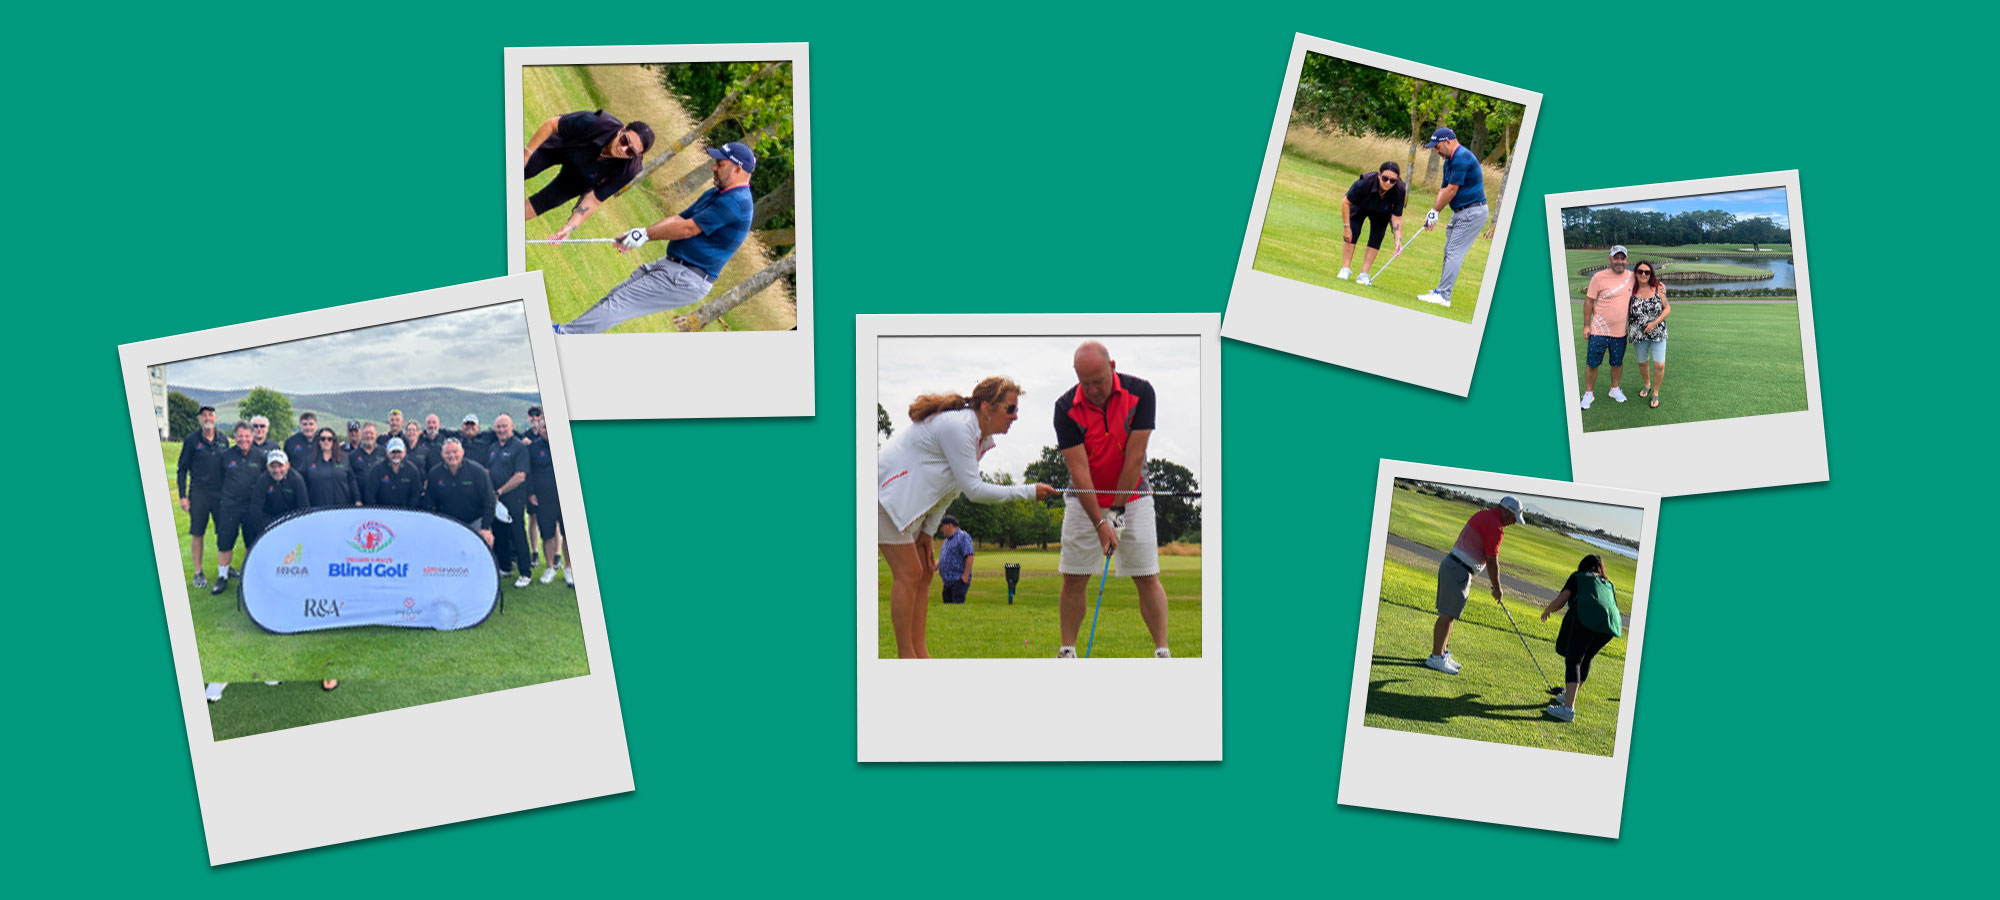 Blind Golfer Andy Gilford: “Golf has given back what our sight has stolen from us”